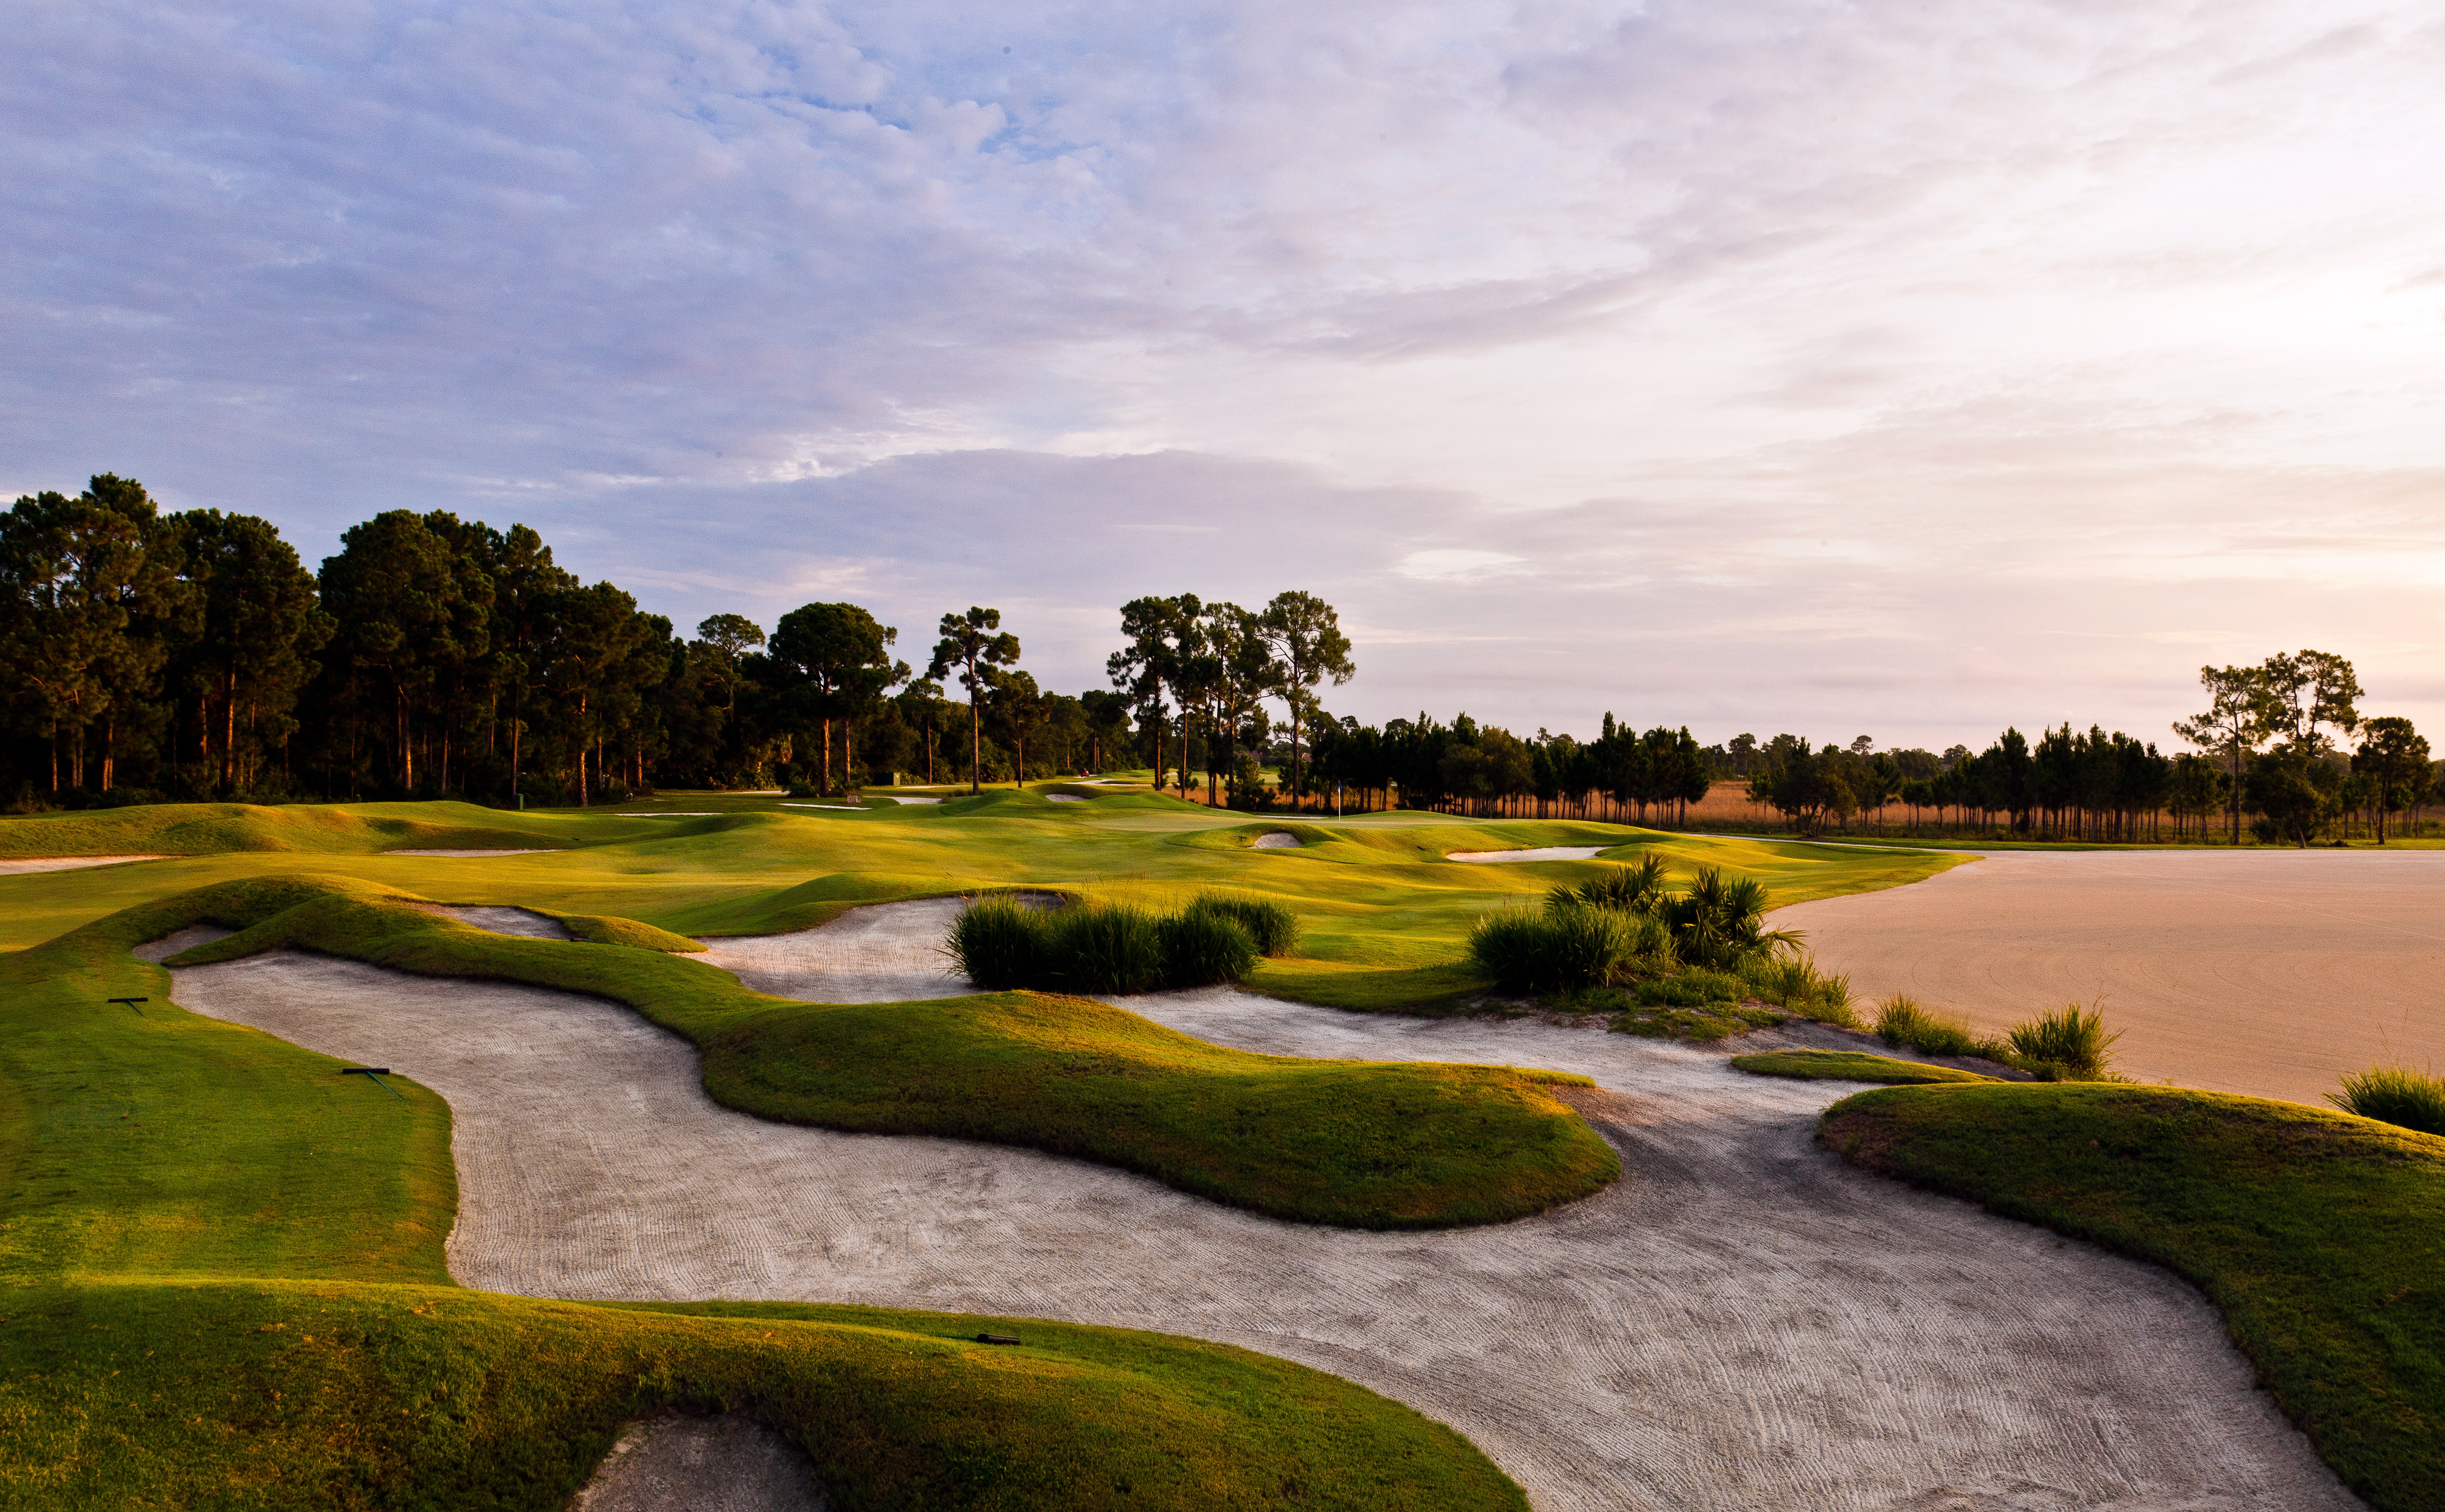 PGA Golf Club's Dye Course in Port St. Lucie, Florida.